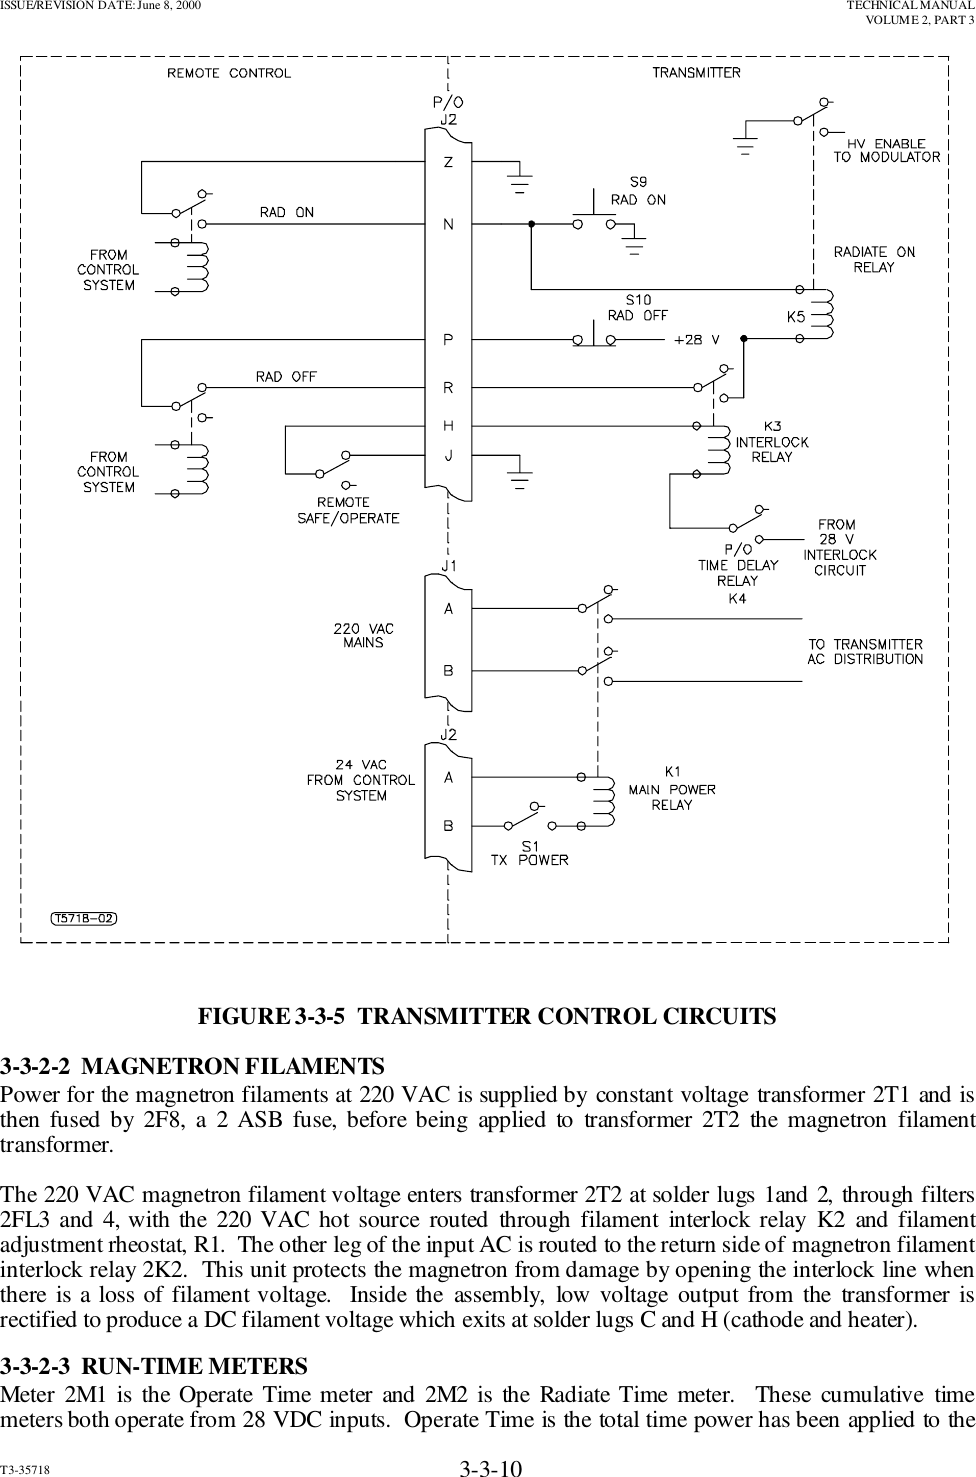 ISSUE/REVISION DATE: June 8, 2000 TECHNICAL MANUALVOLUME 2, PART 3T3-35718 3-3-10FIGURE 3-3-5  TRANSMITTER CONTROL CIRCUITS3-3-2-2  MAGNETRON FILAMENTSPower for the magnetron filaments at 220 VAC is supplied by constant voltage transformer 2T1 and isthen fused by 2F8, a 2 ASB fuse, before being applied to transformer 2T2 the magnetron filamenttransformer.The 220 VAC magnetron filament voltage enters transformer 2T2 at solder lugs 1and 2, through filters2FL3 and 4, with the 220 VAC hot source routed through filament interlock relay K2 and filamentadjustment rheostat, R1.  The other leg of the input AC is routed to the return side of magnetron filamentinterlock relay 2K2.  This unit protects the magnetron from damage by opening the interlock line whenthere is a loss of filament voltage.  Inside the assembly, low voltage output from the transformer isrectified to produce a DC filament voltage which exits at solder lugs C and H (cathode and heater).3-3-2-3  RUN-TIME METERSMeter 2M1 is the Operate Time meter and 2M2 is the Radiate Time meter.  These cumulative timemeters both operate from 28 VDC inputs.  Operate Time is the total time power has been applied to the